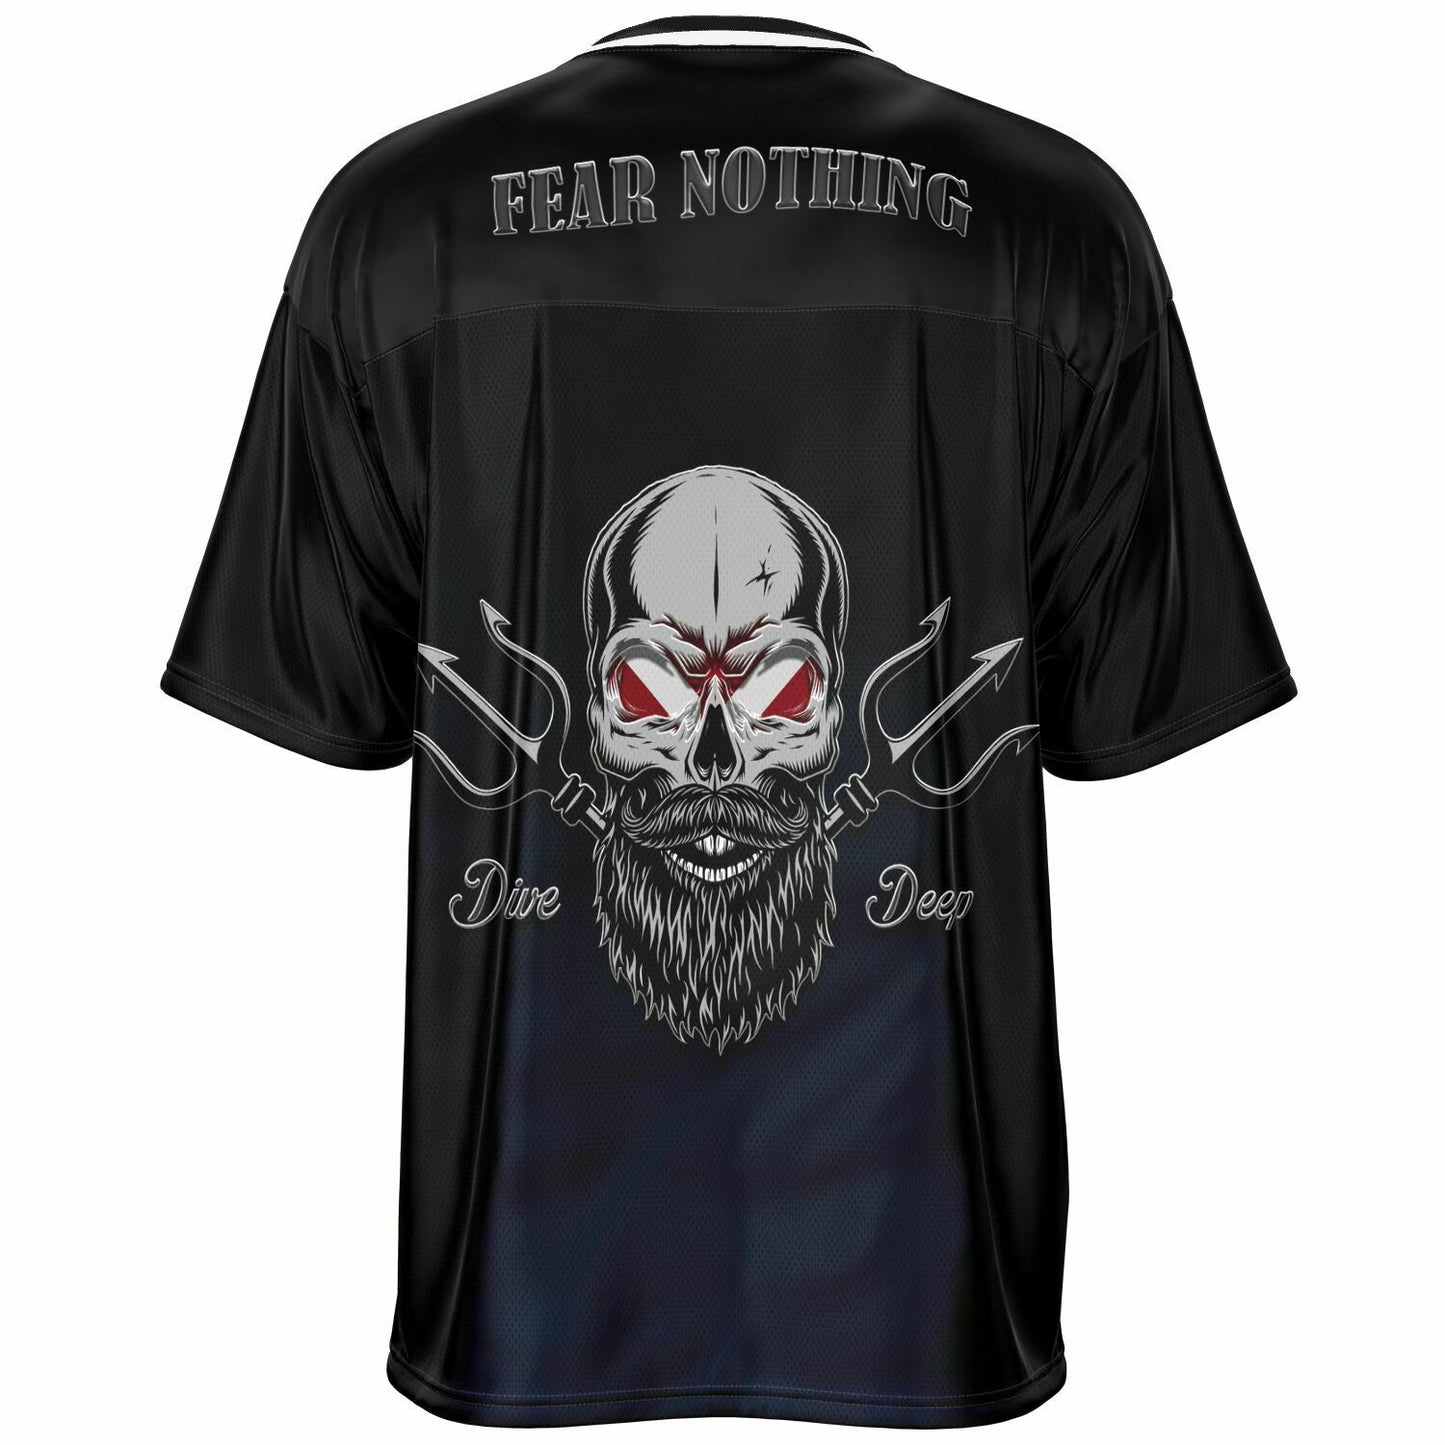 Fear Nothing Jersey